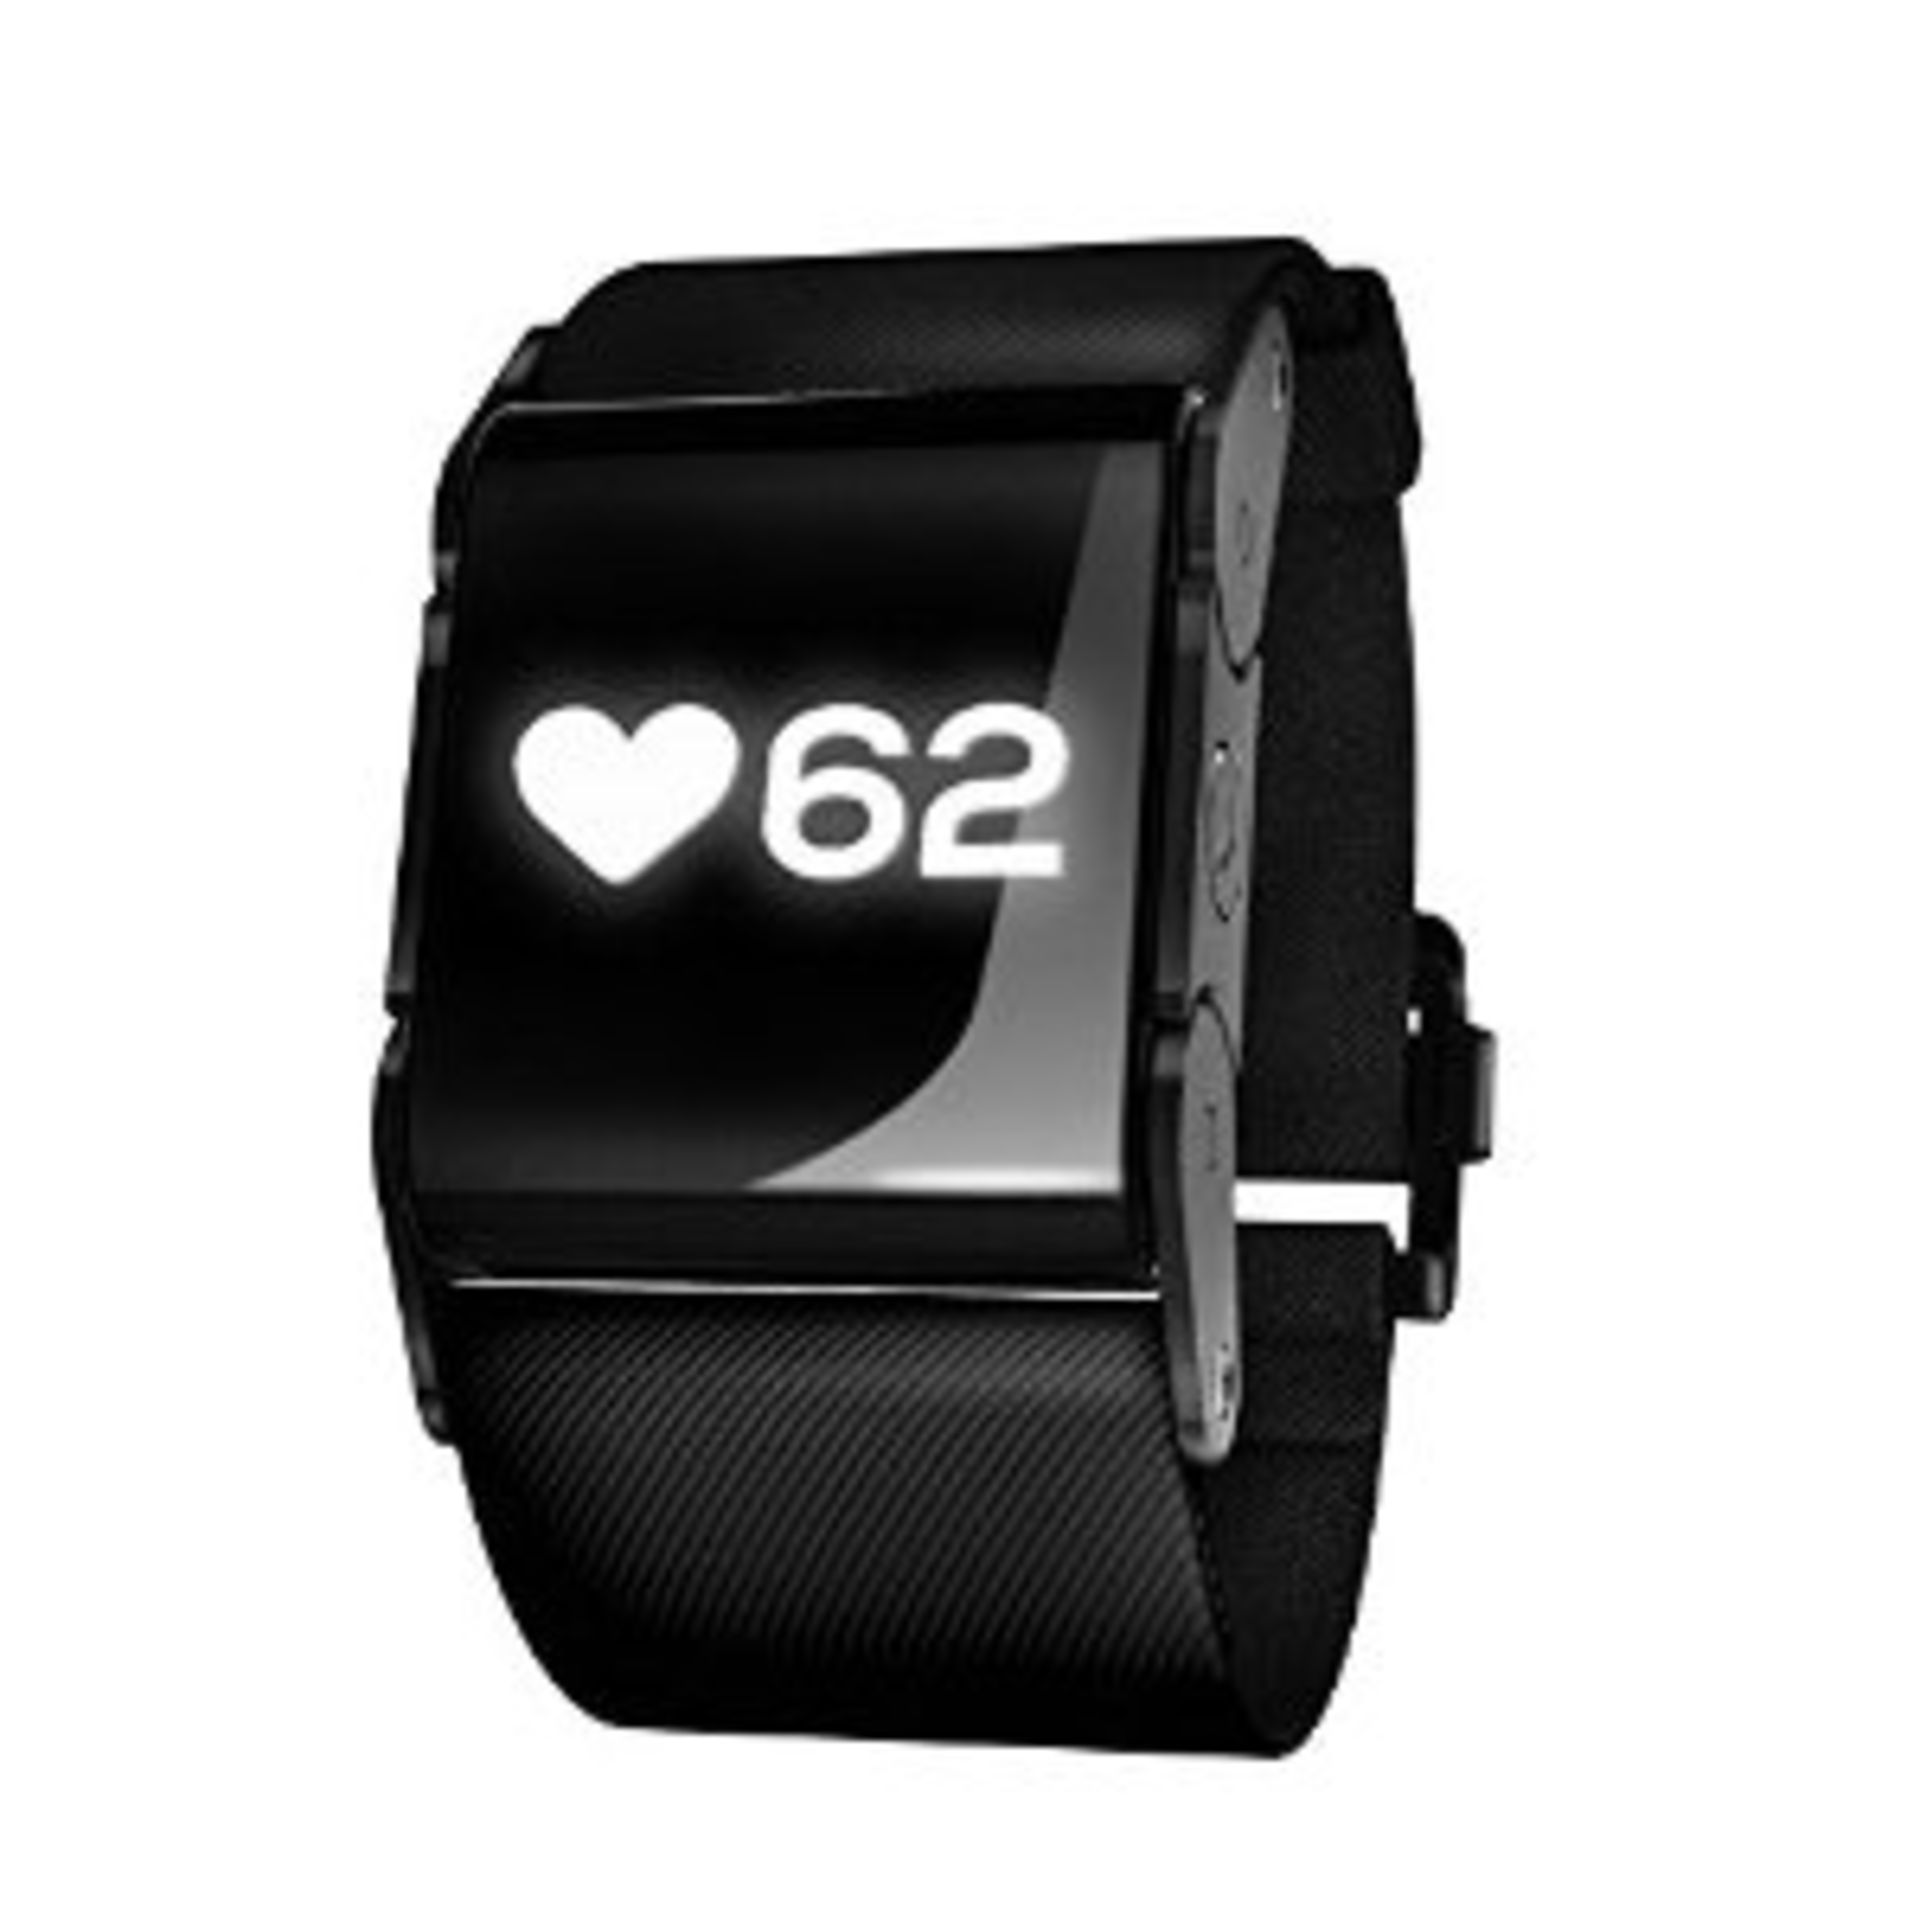 V *TRADE QTY* Brand New Pulse On Heart Rate Wrist Band - App Connectivity - Measures Training Effect